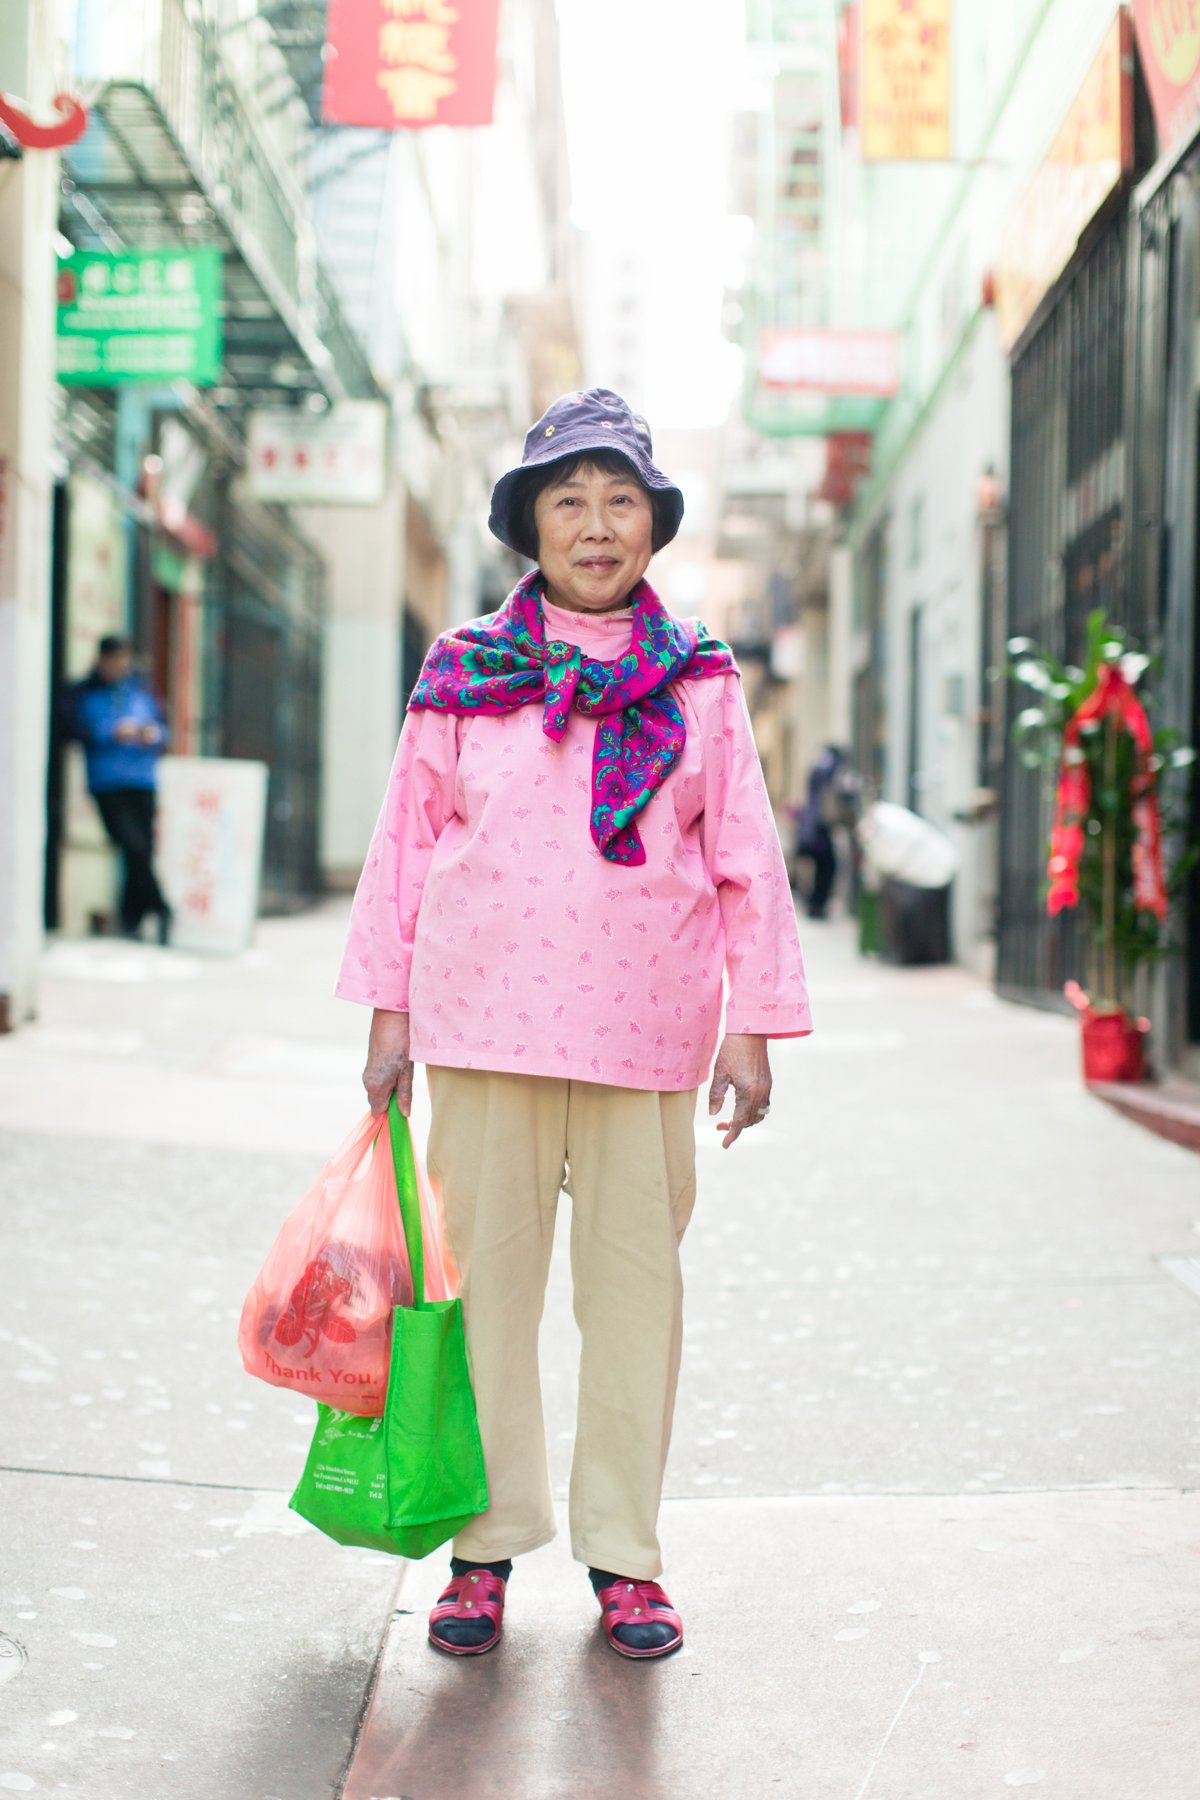 A Photo blog that documents the unexpected sartorial selections of seniors in San Francisco’s Chinatown